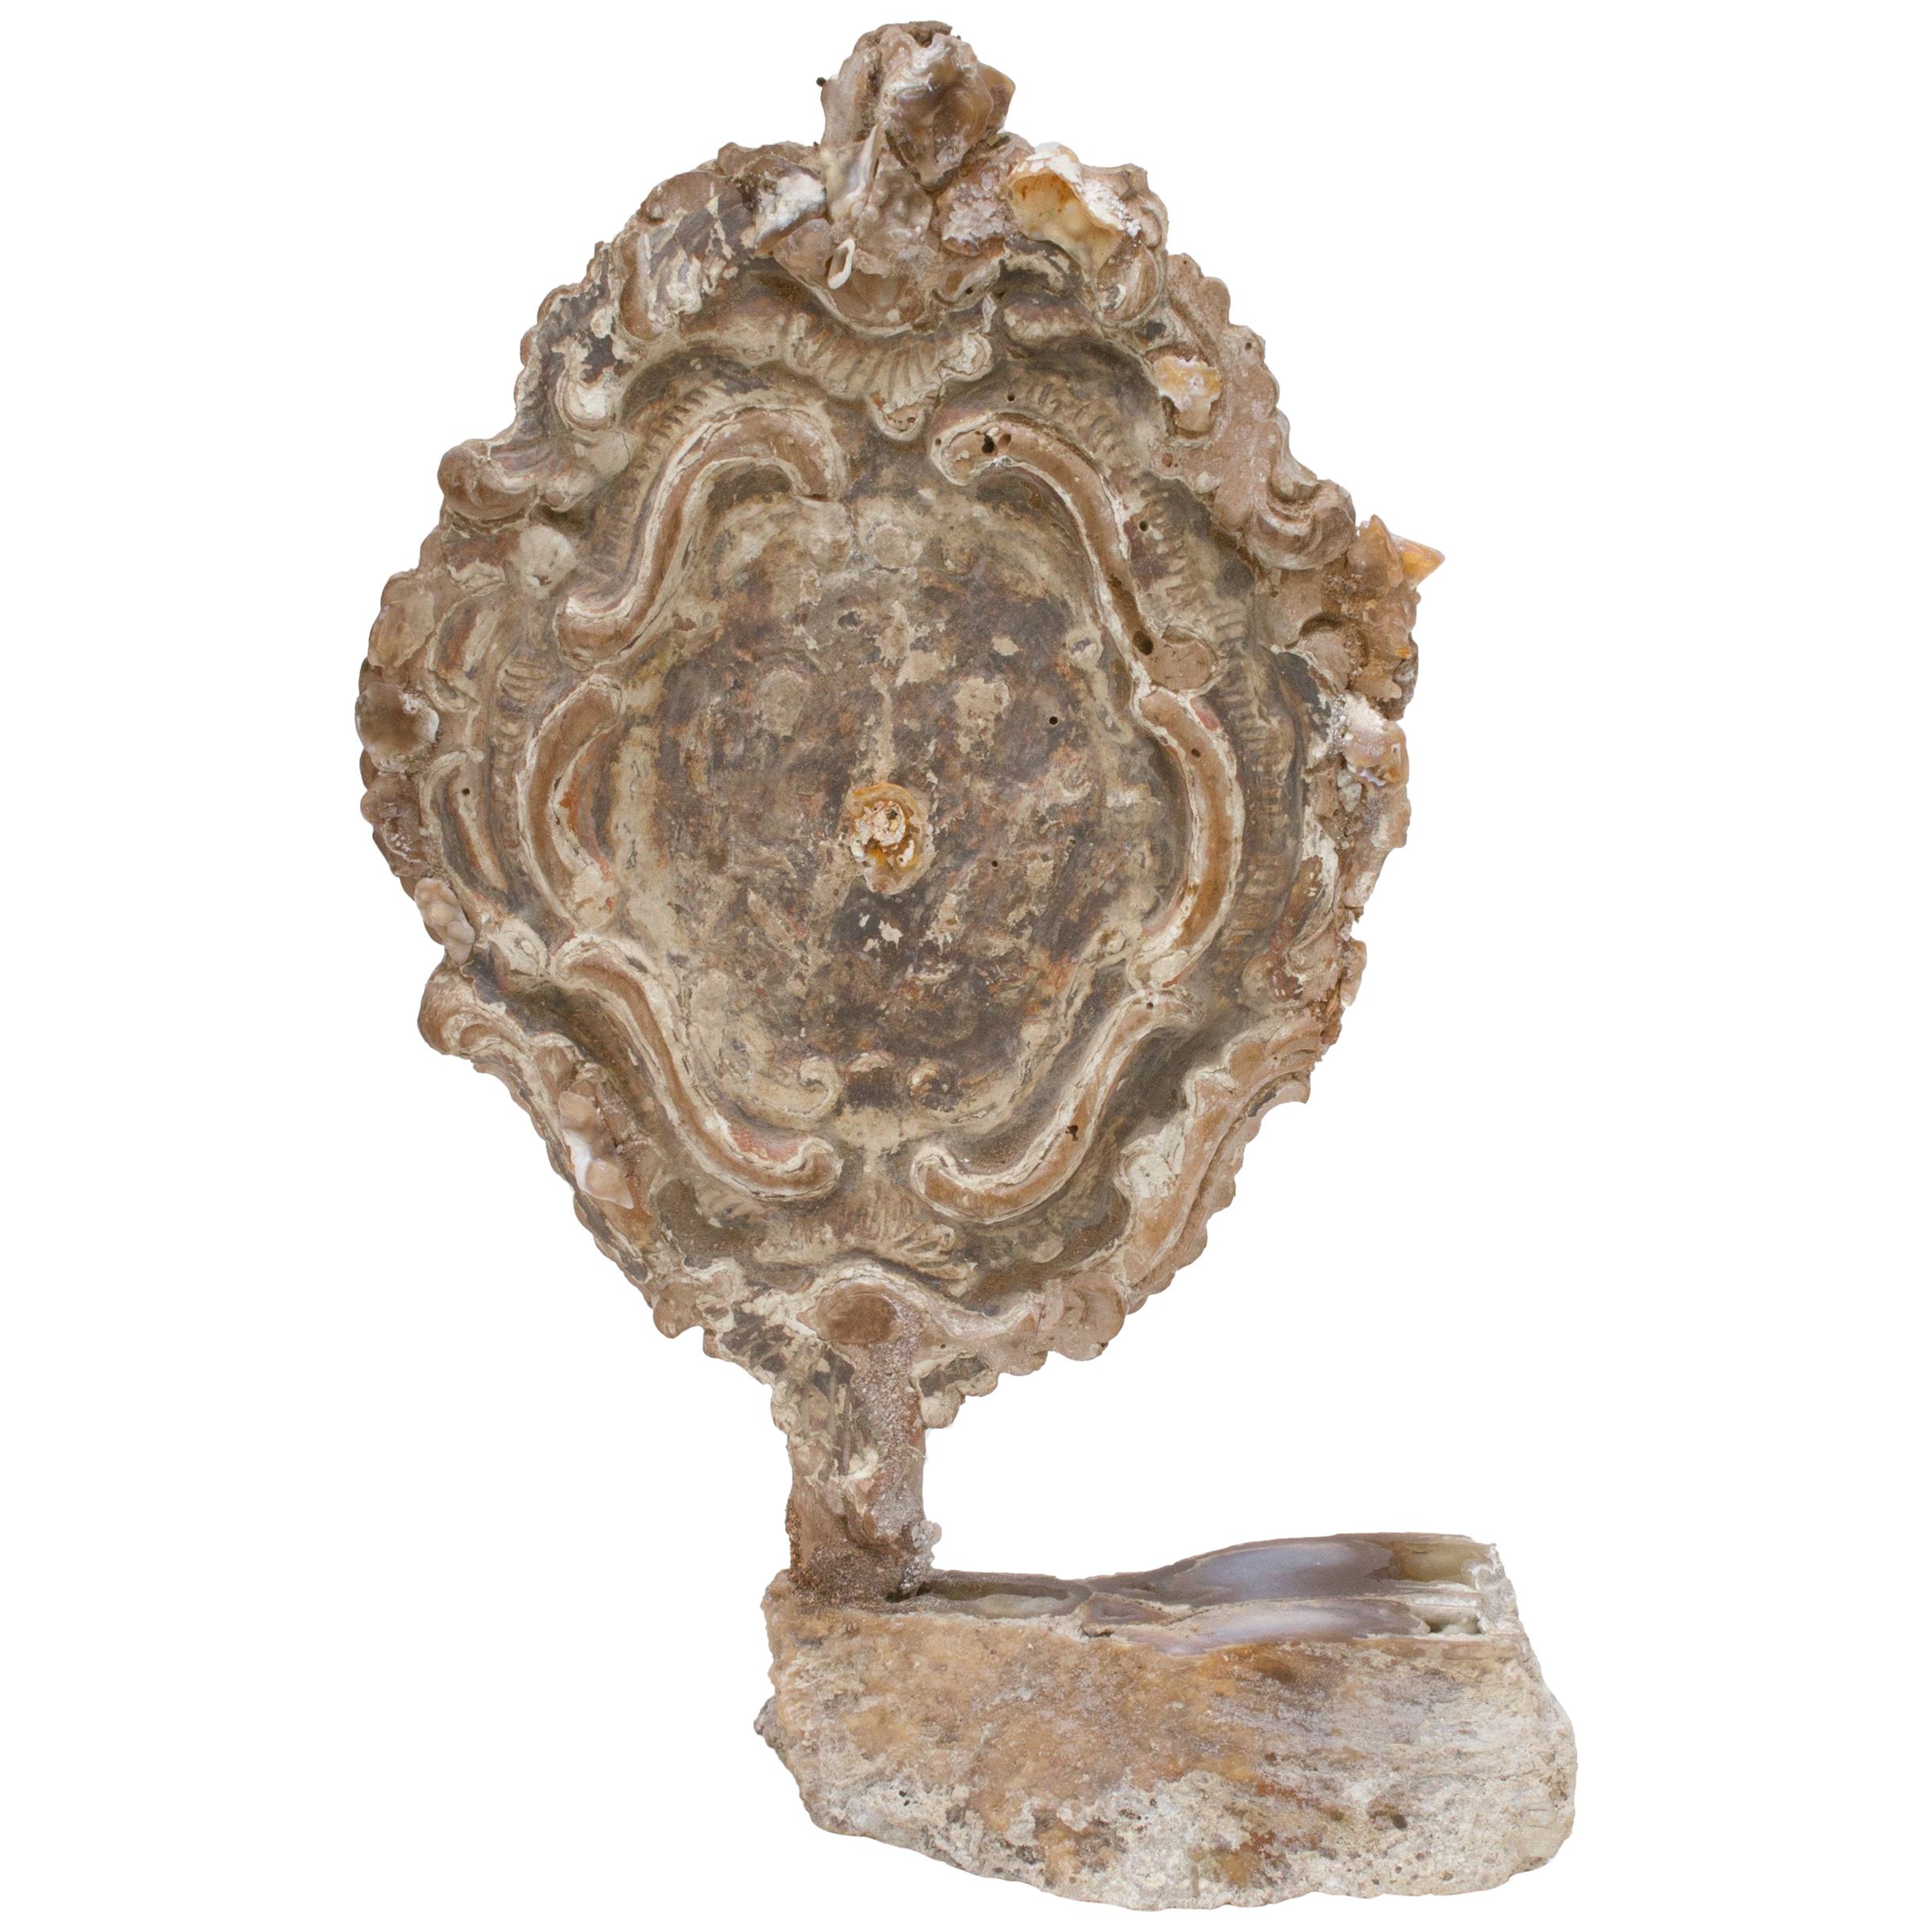 18th Century Italian Processional Finial with Polished Agate Coral on an Agate